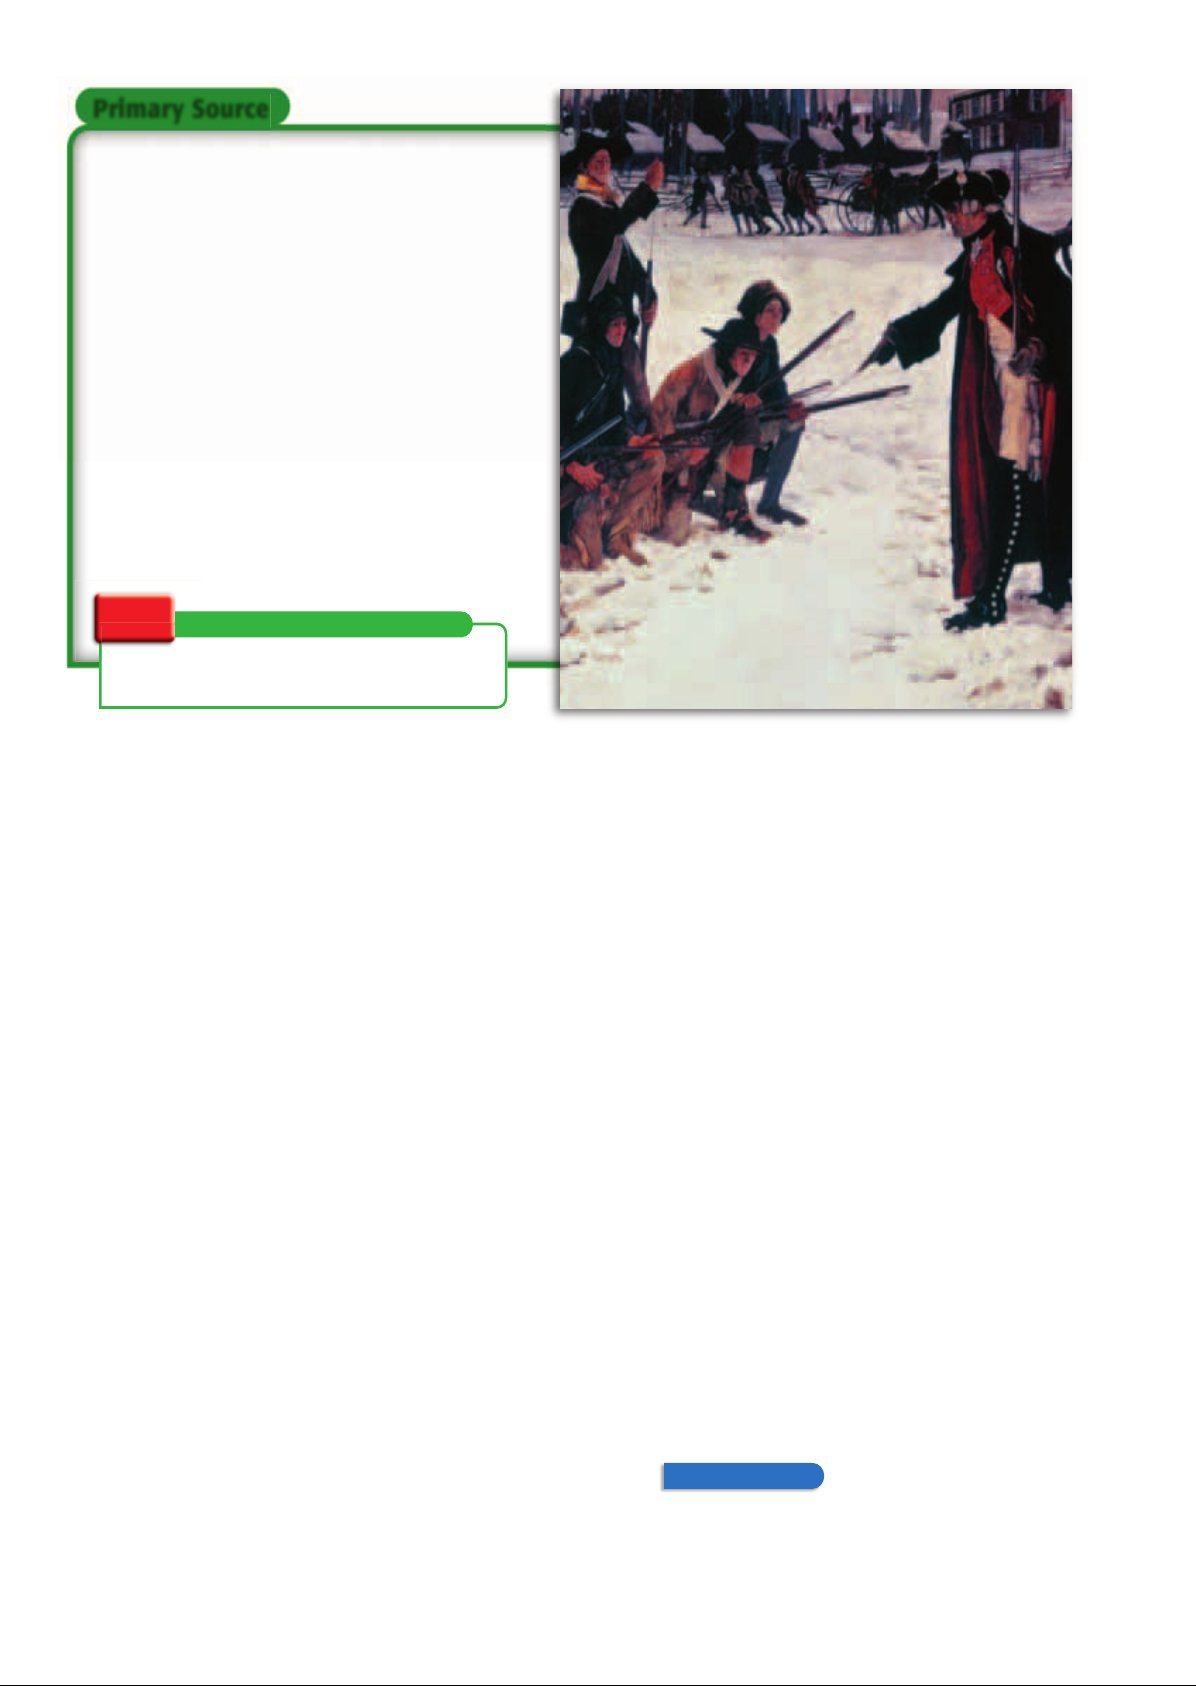 US_History_Textbook_8th_Grade_Chapter_3_The_American_Revolution Image-20